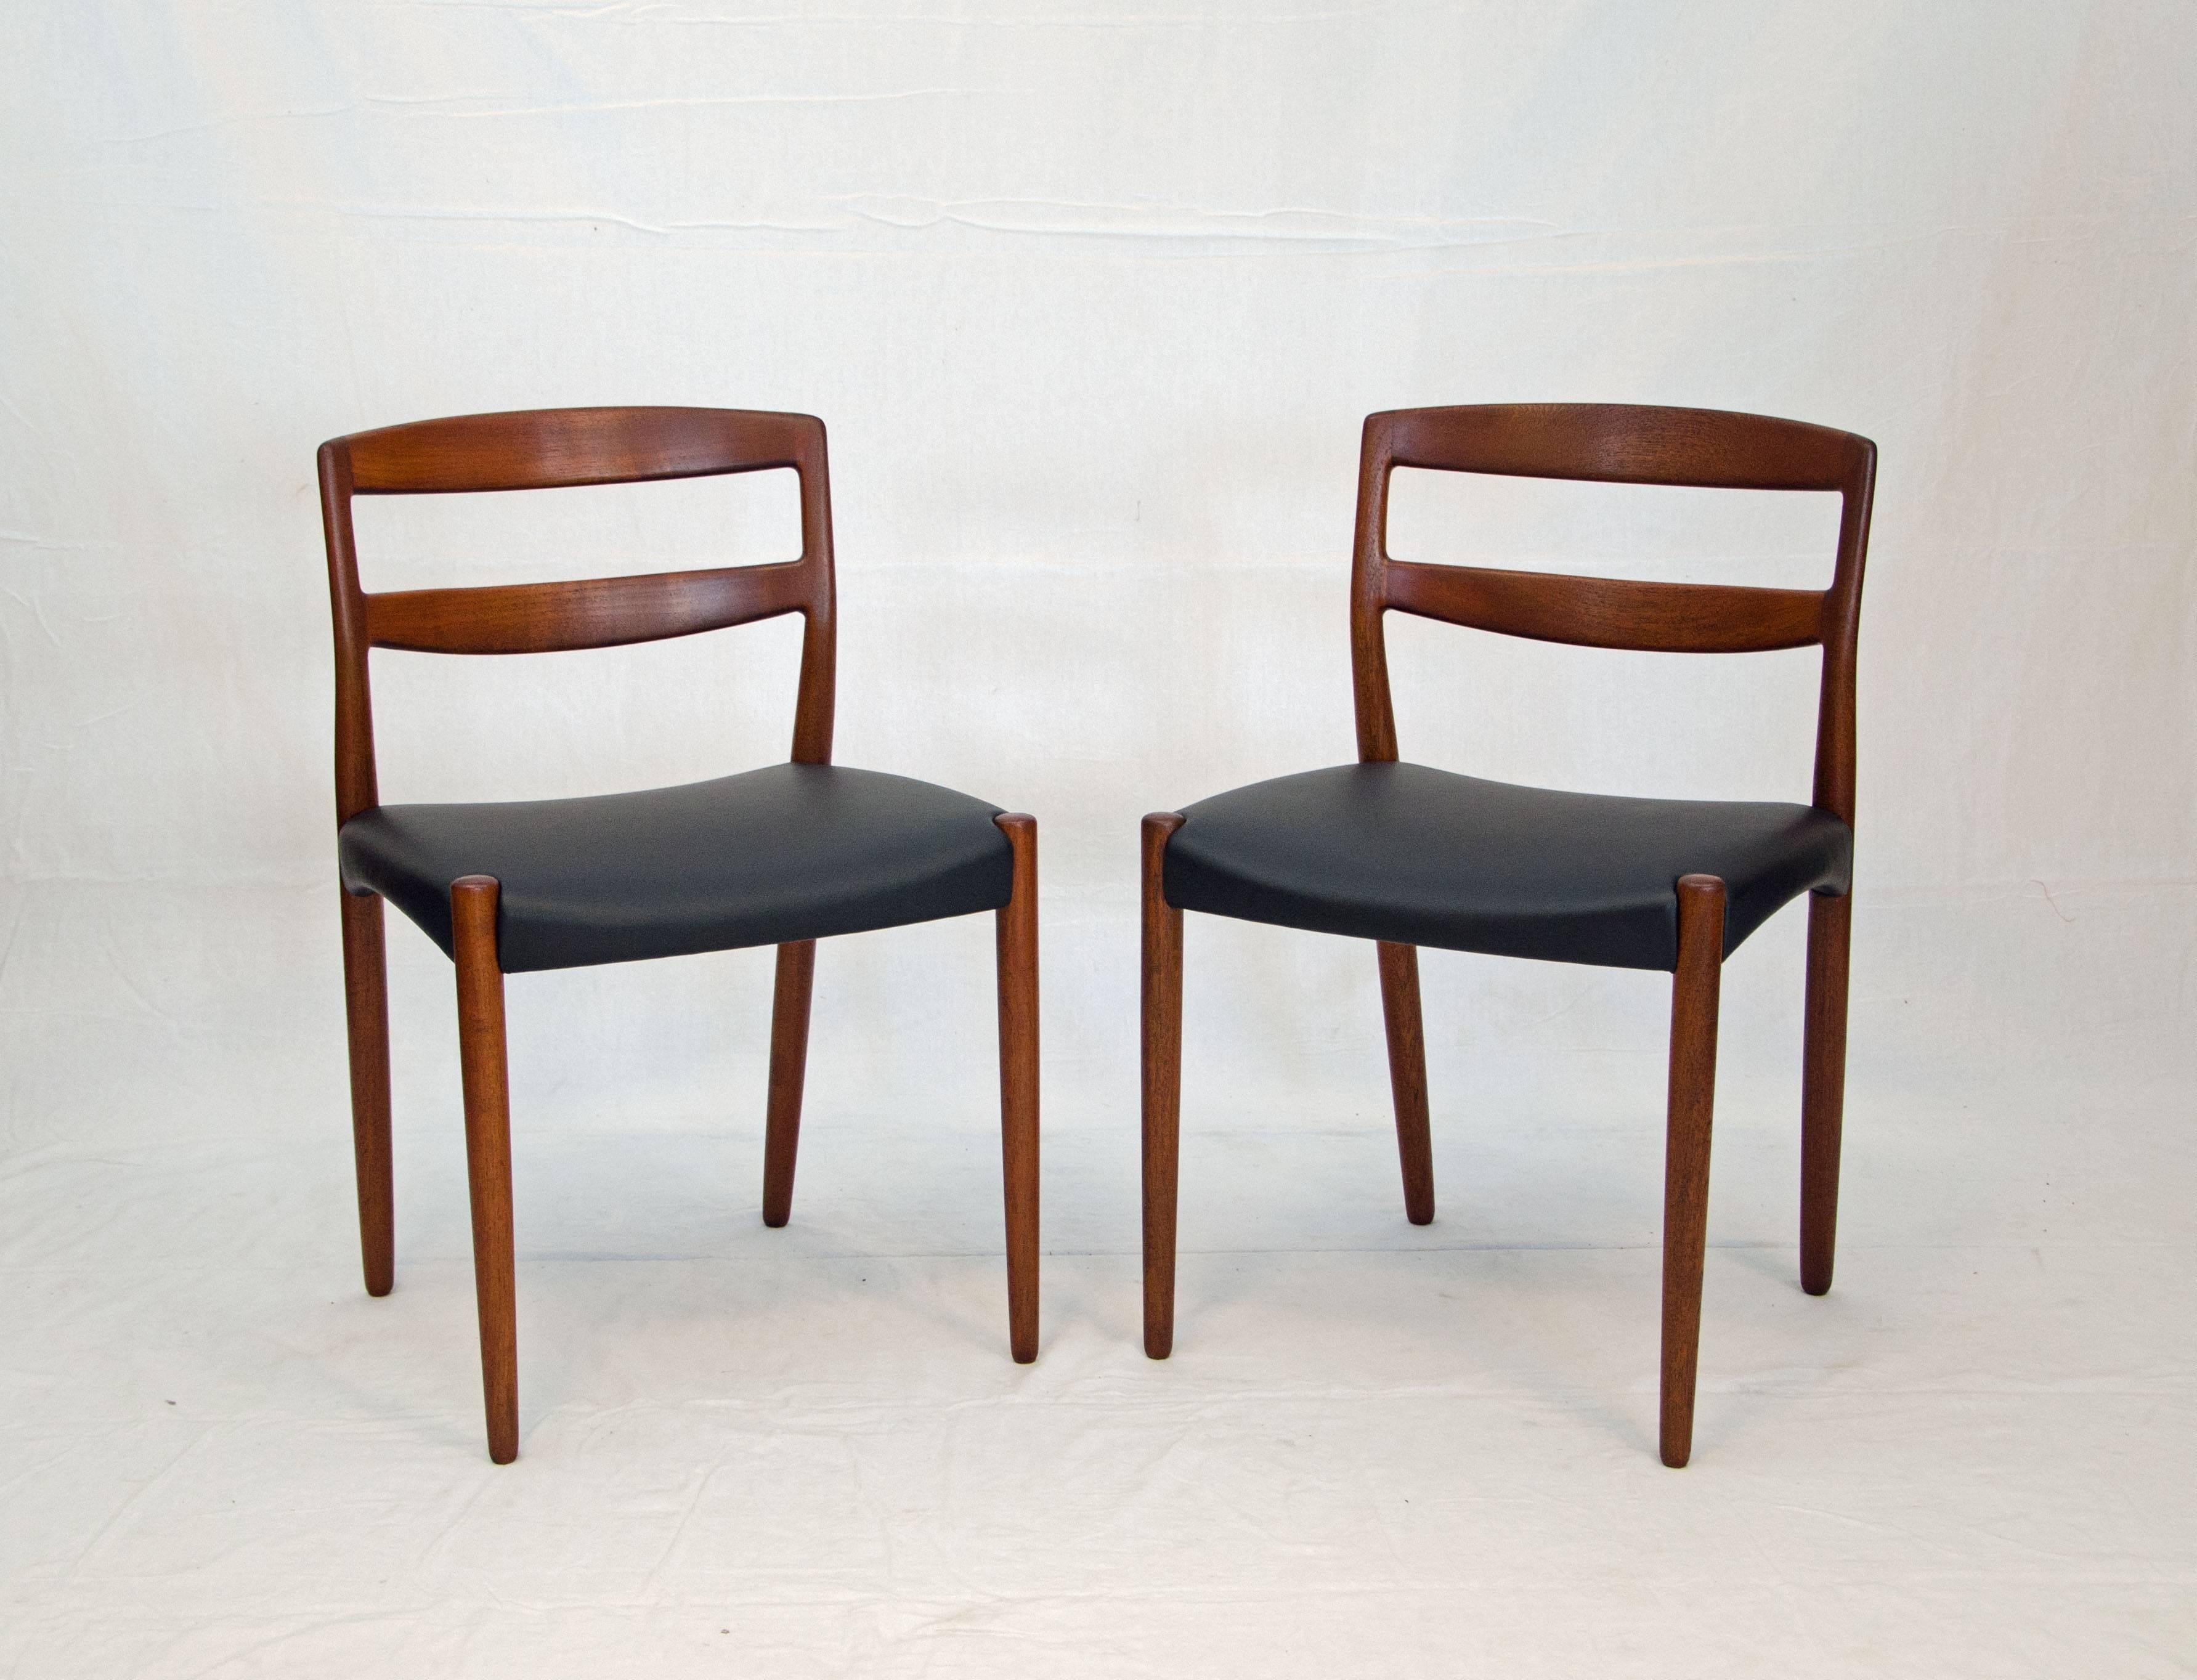 Scandinavian Modern Pair of Danish Teak Dining or Accent Chairs, Willy Beck